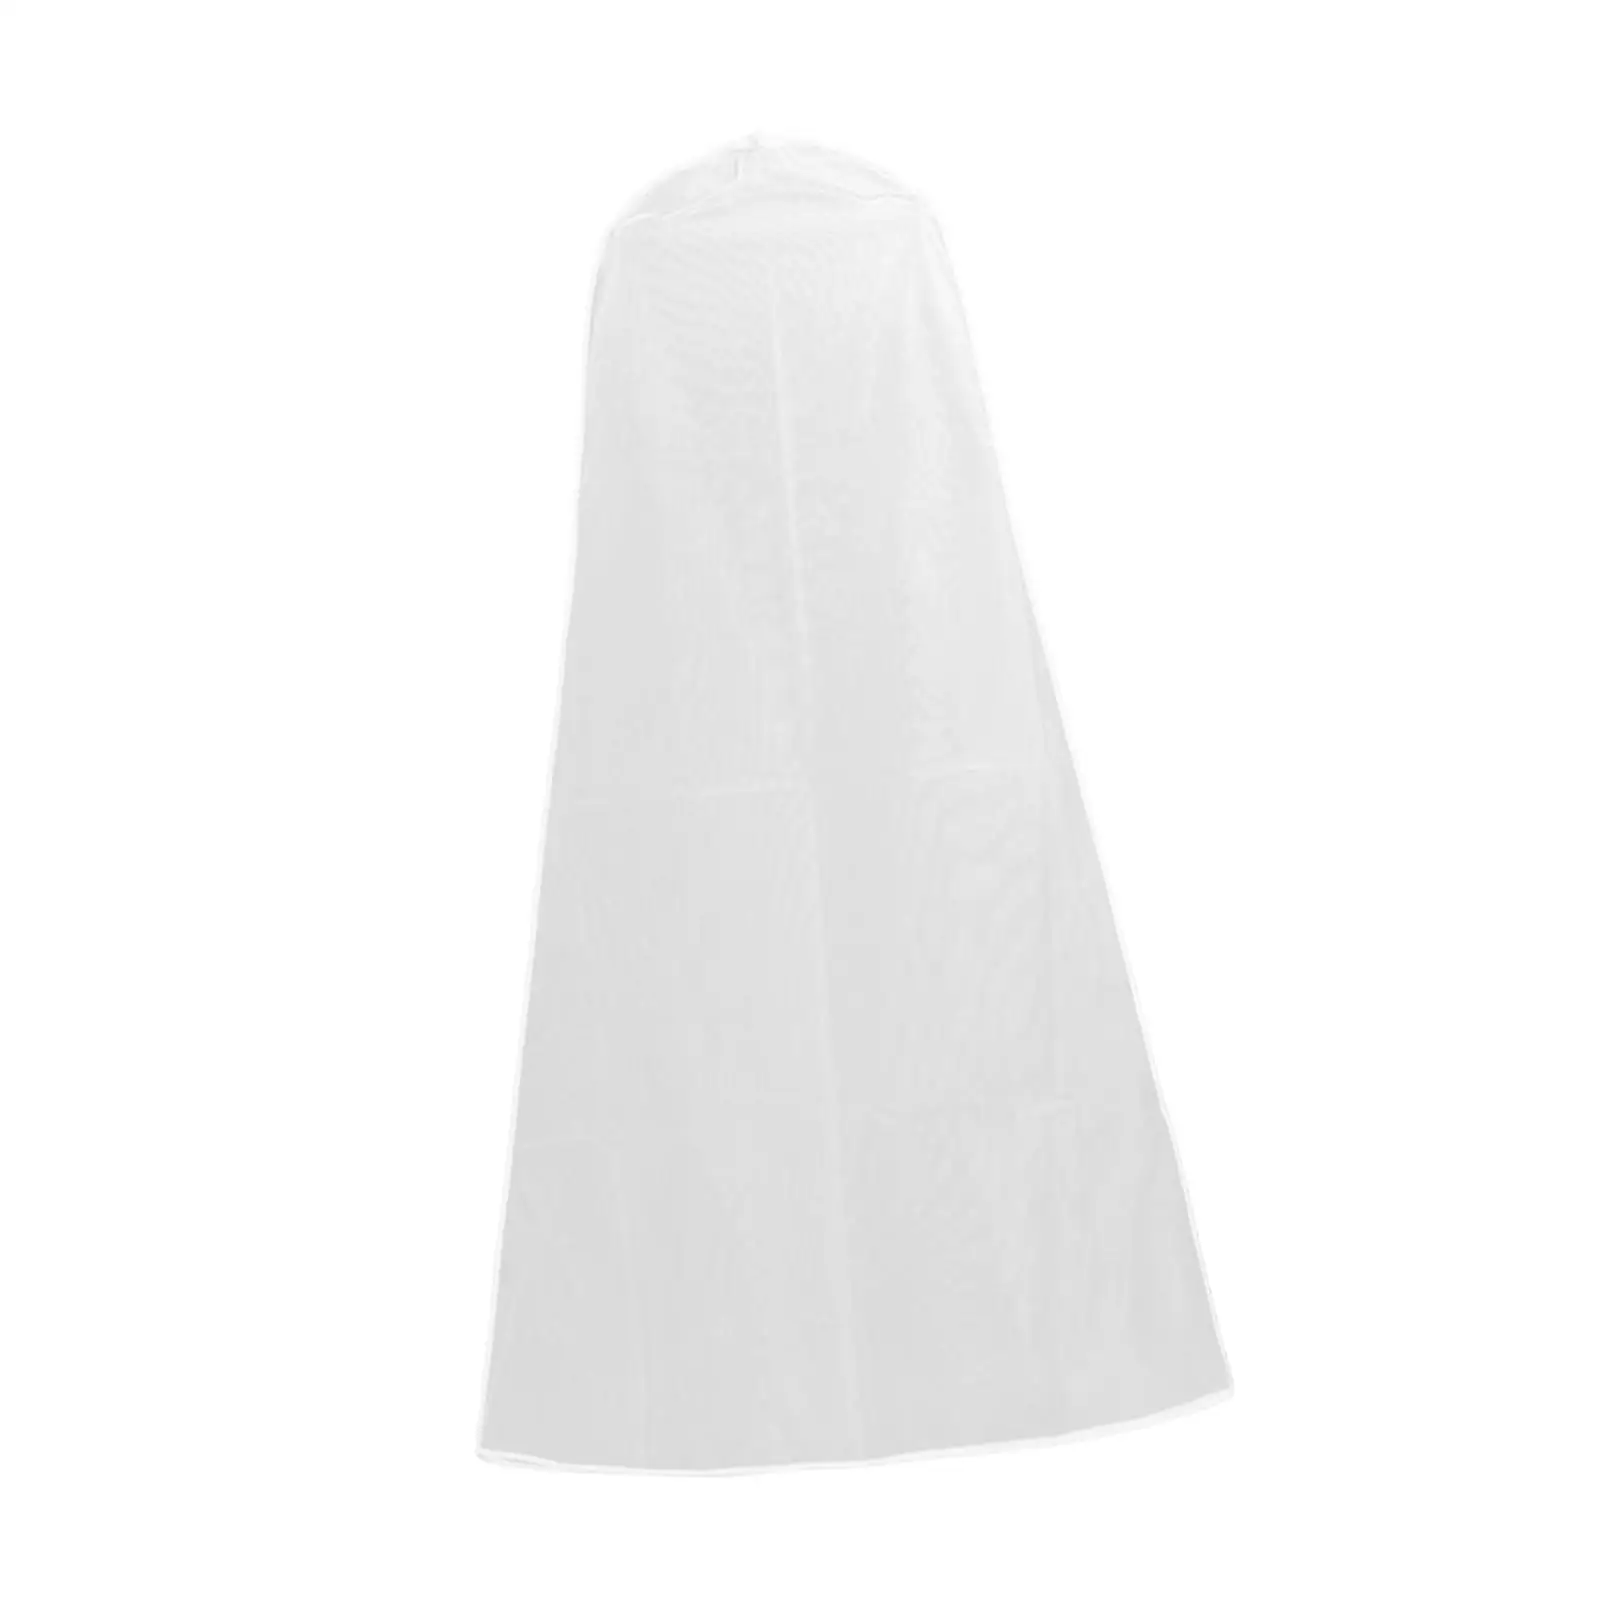 Bridal Dress Gown Cover Clothing Cover Pullover Washable Wedding Dress Garment Bag for Wardrobe Closet Storage Wedding Dress